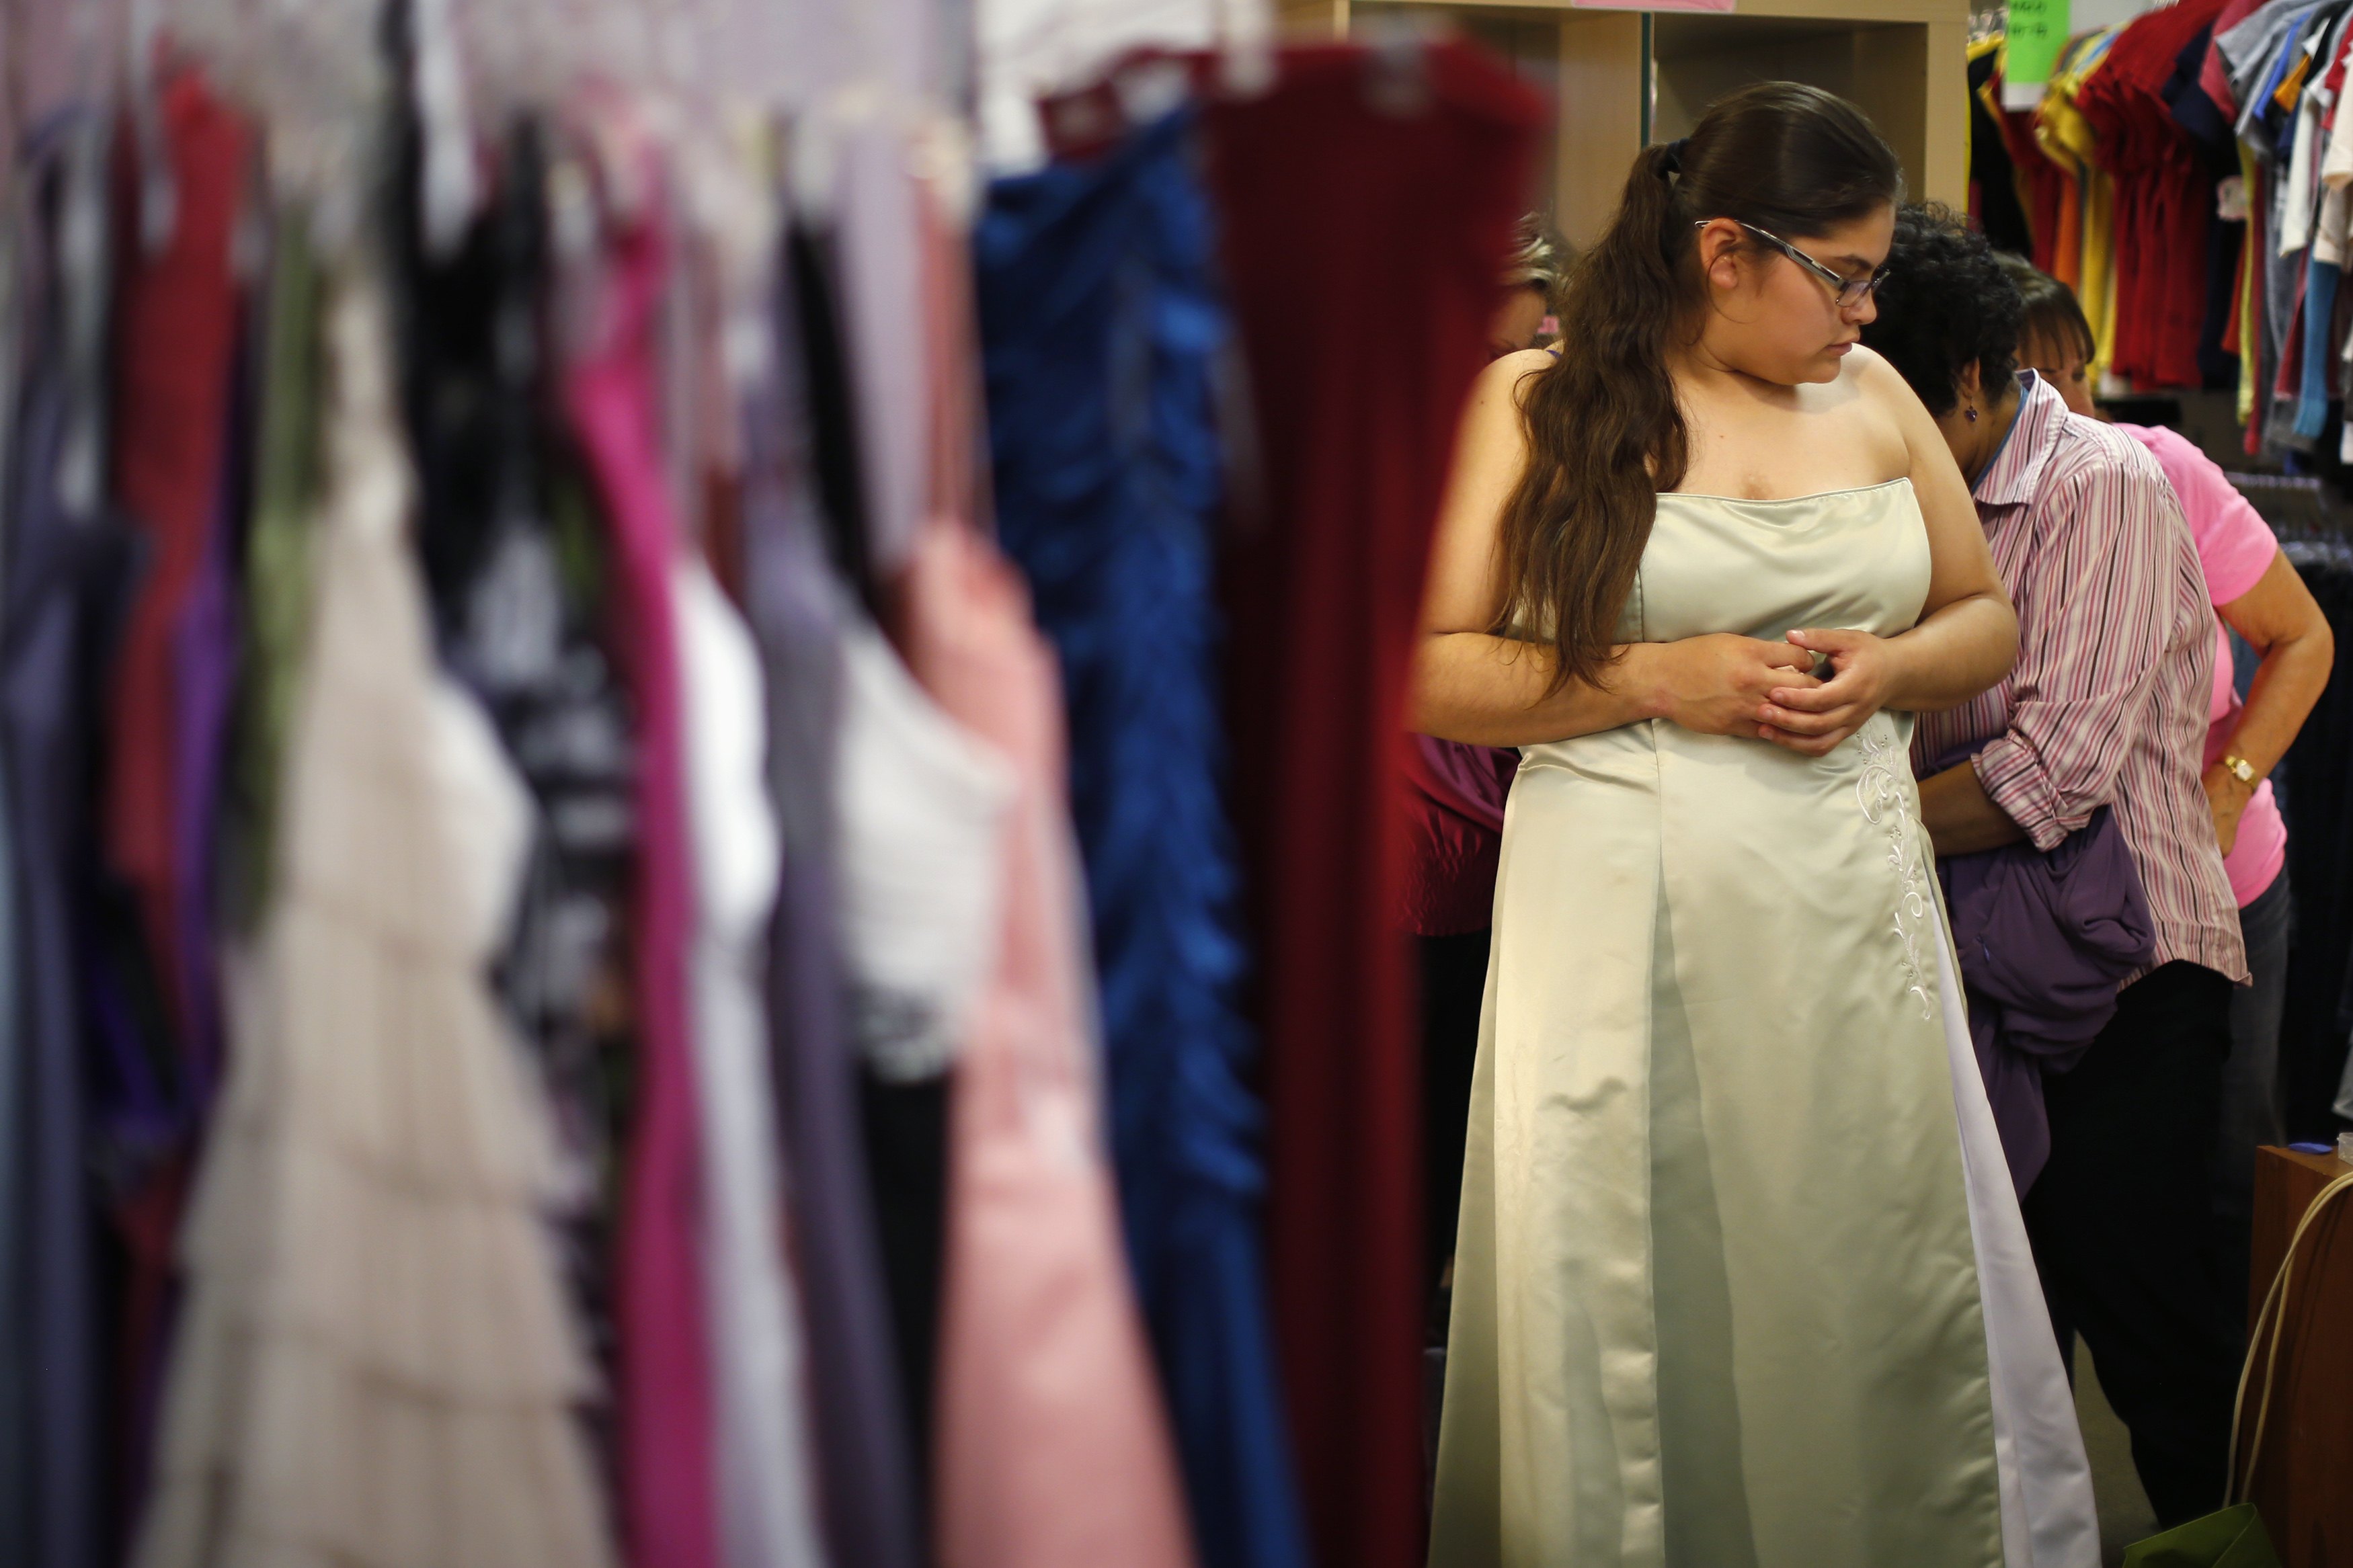 Perla Oseguera, 19, tries on a dress at an event that provides free prom dresses, shoes and accessories to 70 homeless and low income school girls from the Assistance League of Los Angeles, California March 5, 2015.